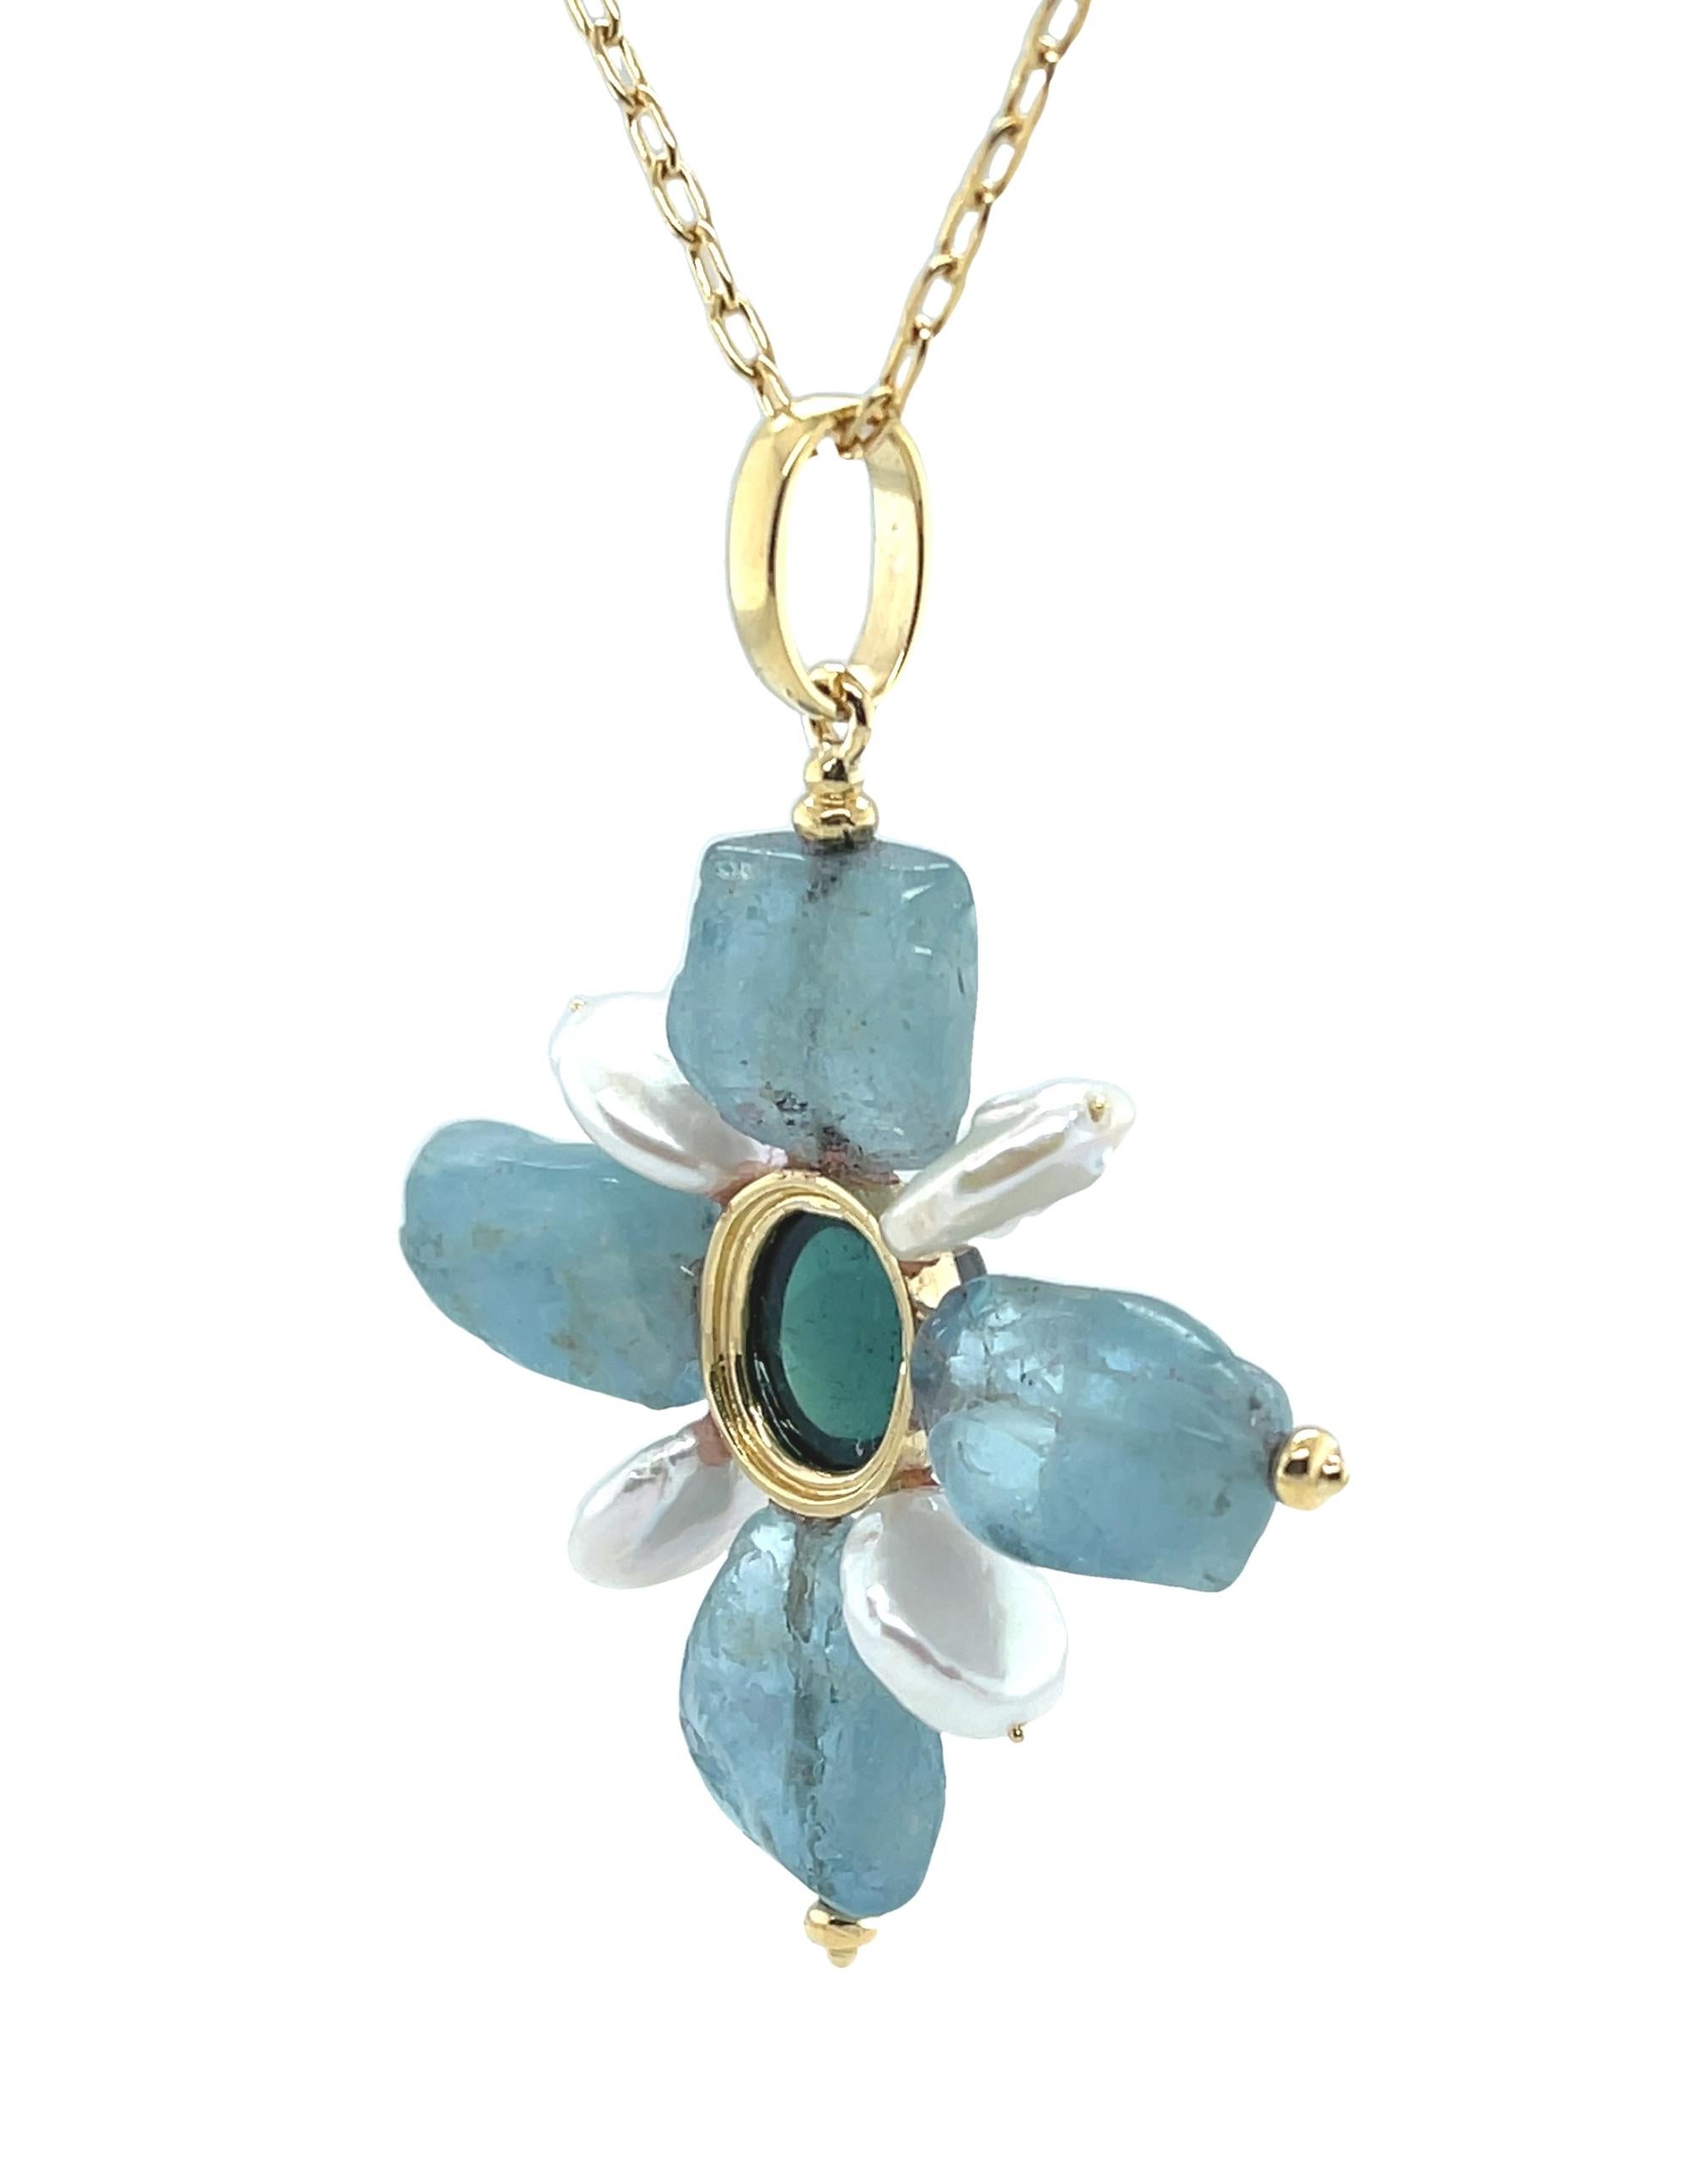 This eye-catching cross pendant features deep blue aquamarine freeform beads and white coin pearls arranged around a beautiful indicolite tourmaline cabochon. The indicolite tourmaline is a rich shade of teal greenish blue, and bezel set in bright,